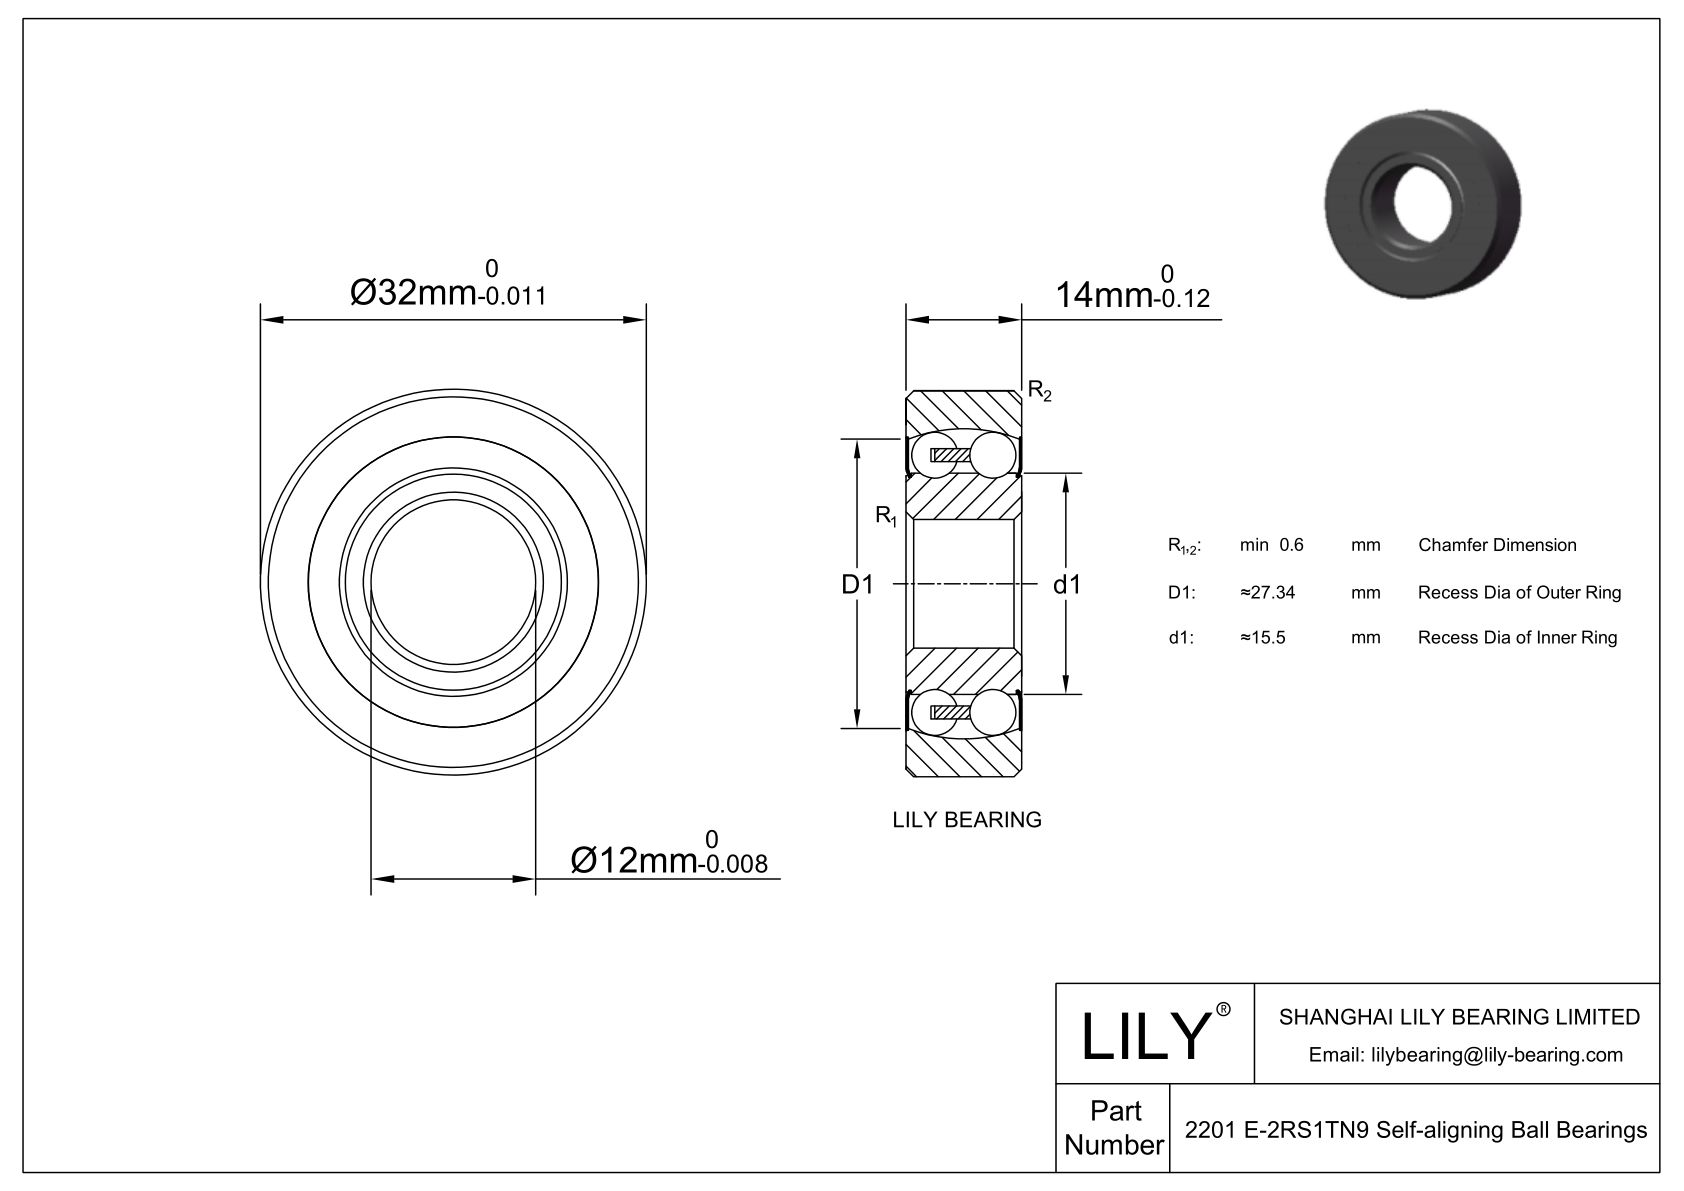 CE2201 E-SCPP Silicon Carbide Self Aligning Ball Bearings cad drawing